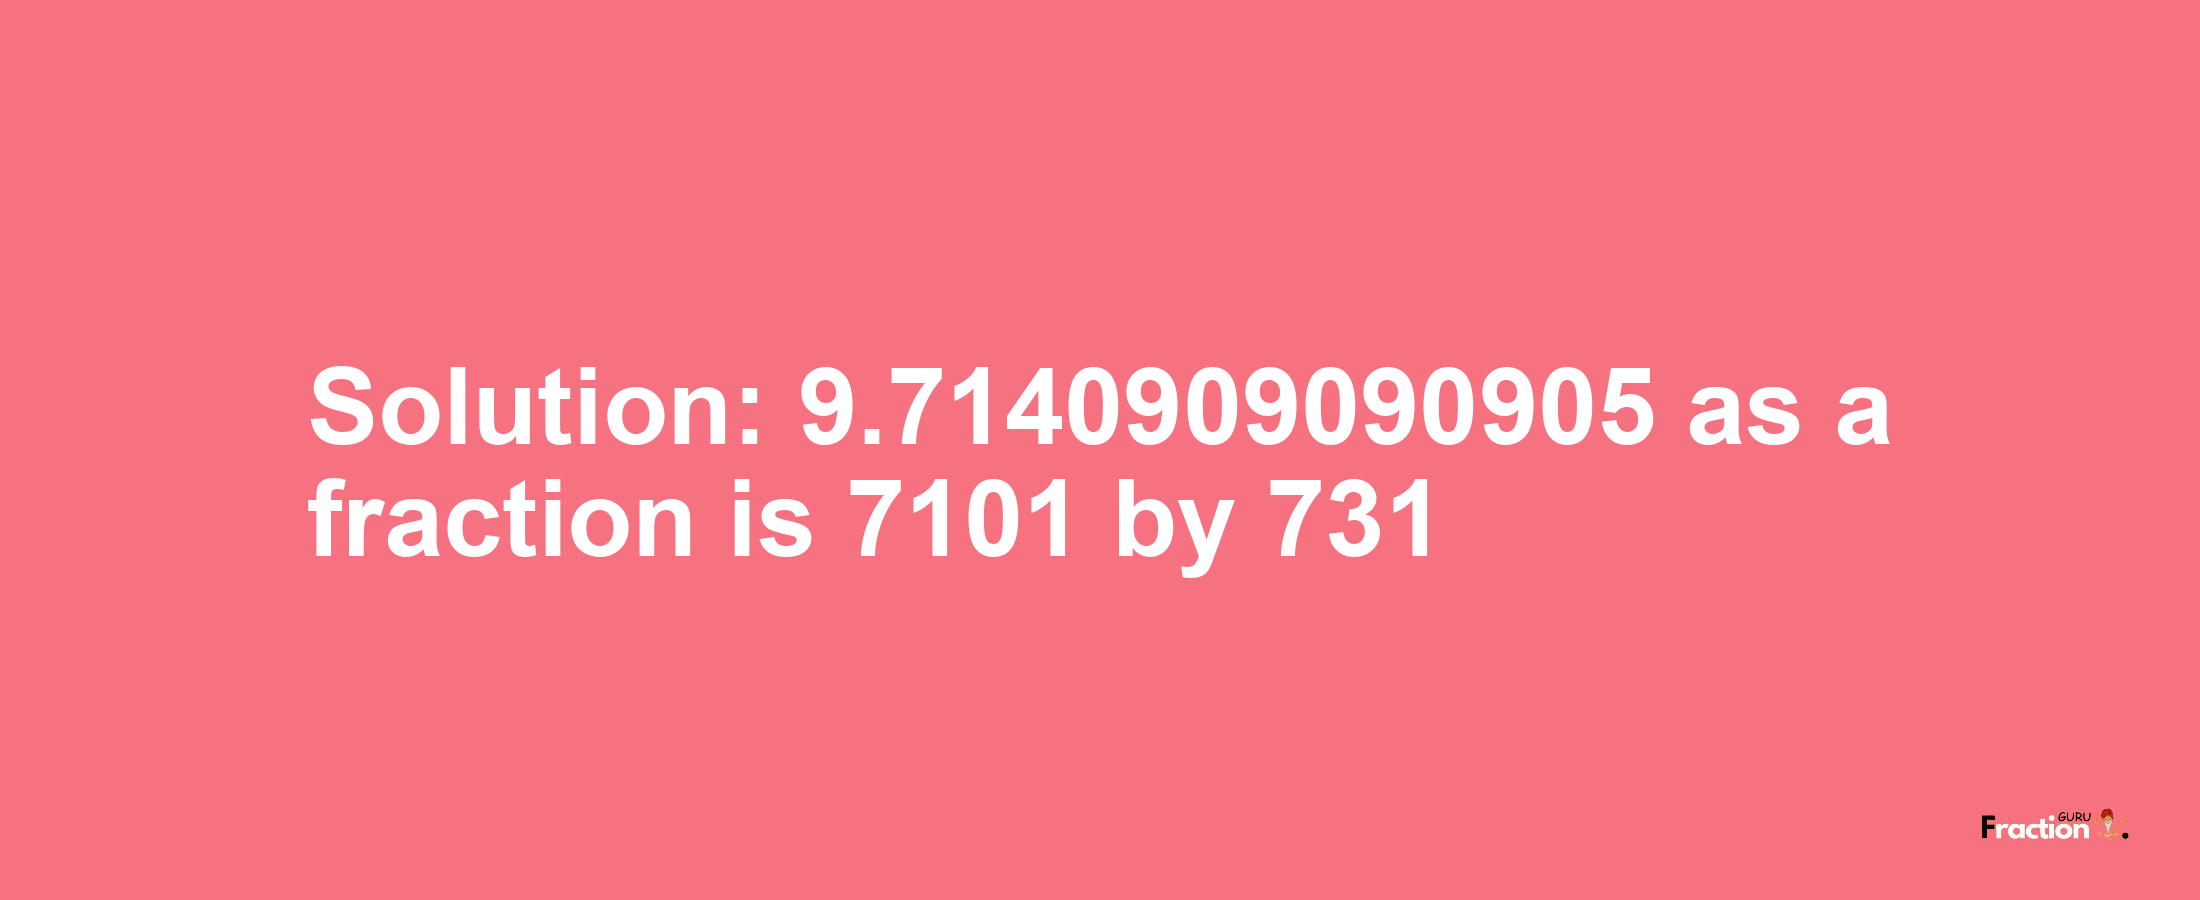 Solution:9.7140909090905 as a fraction is 7101/731